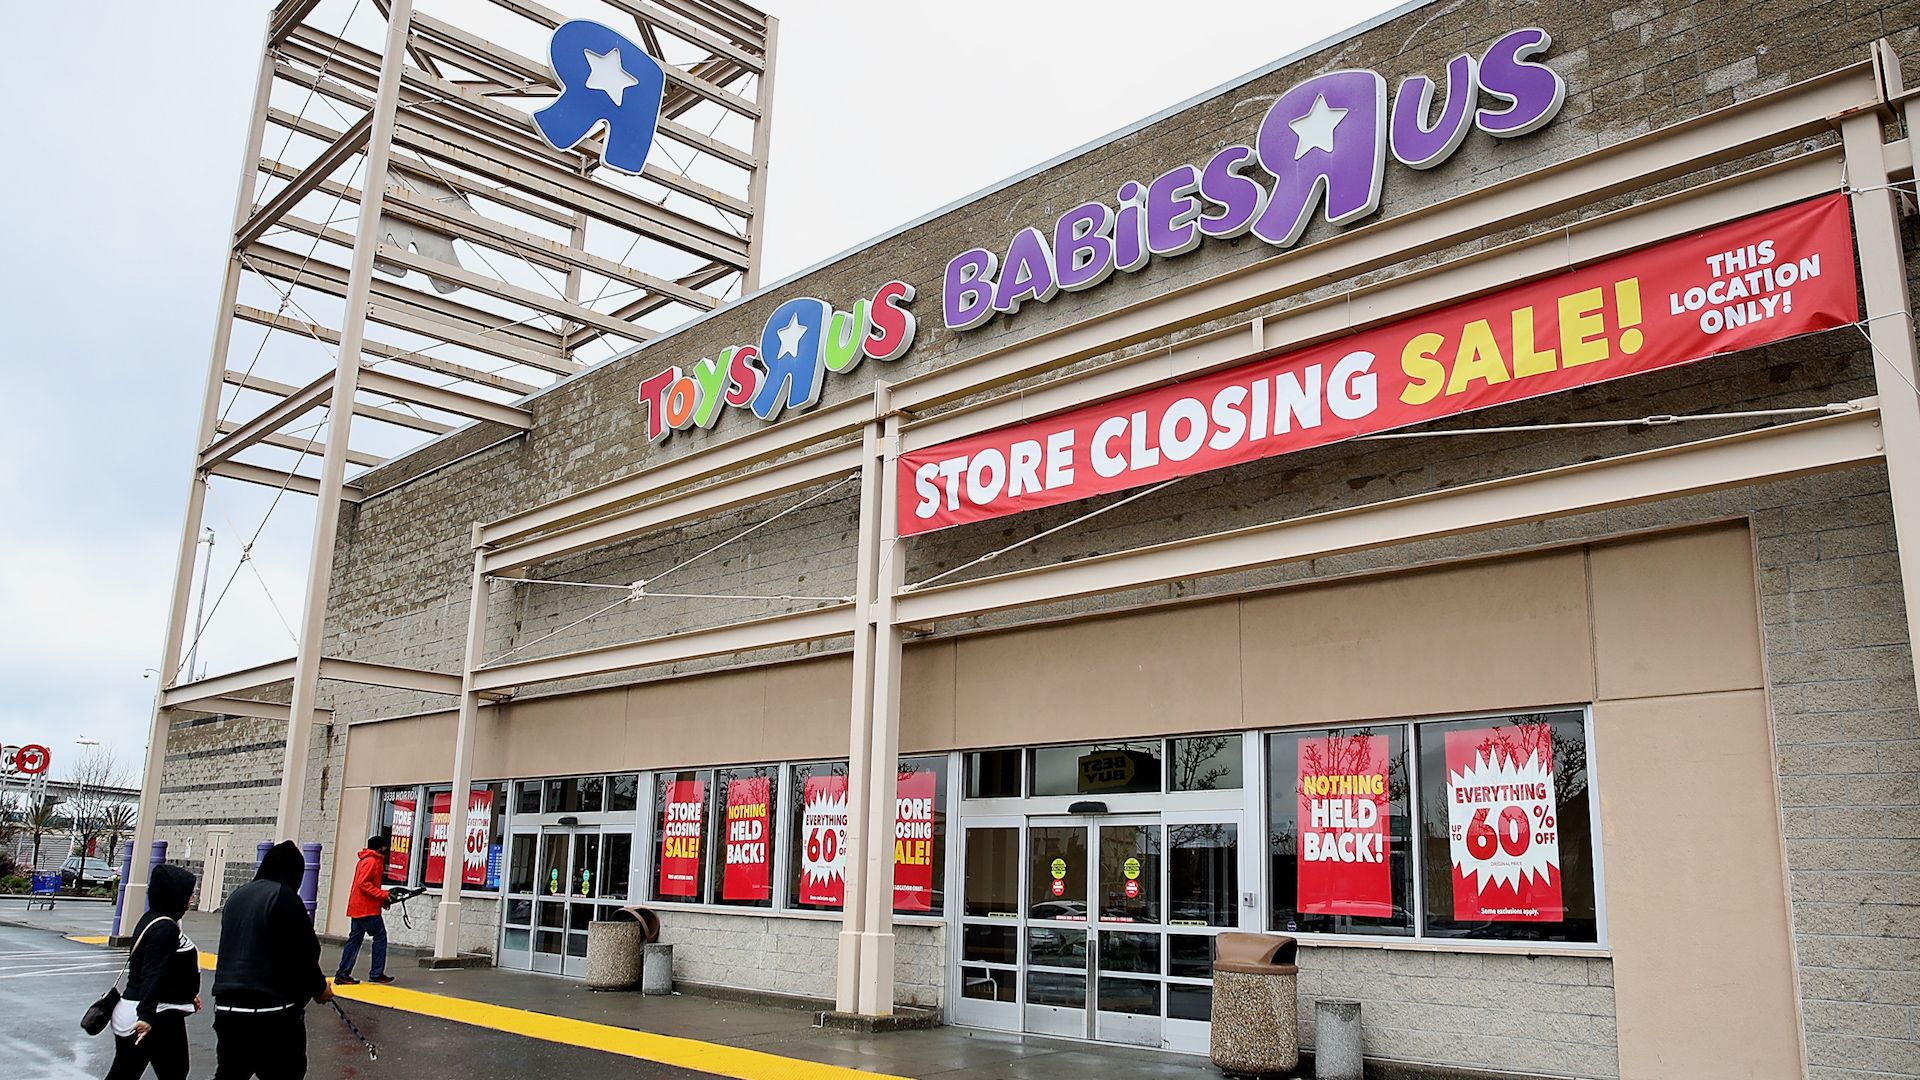 Former Ross Toys R Us Store To Be Auctioned